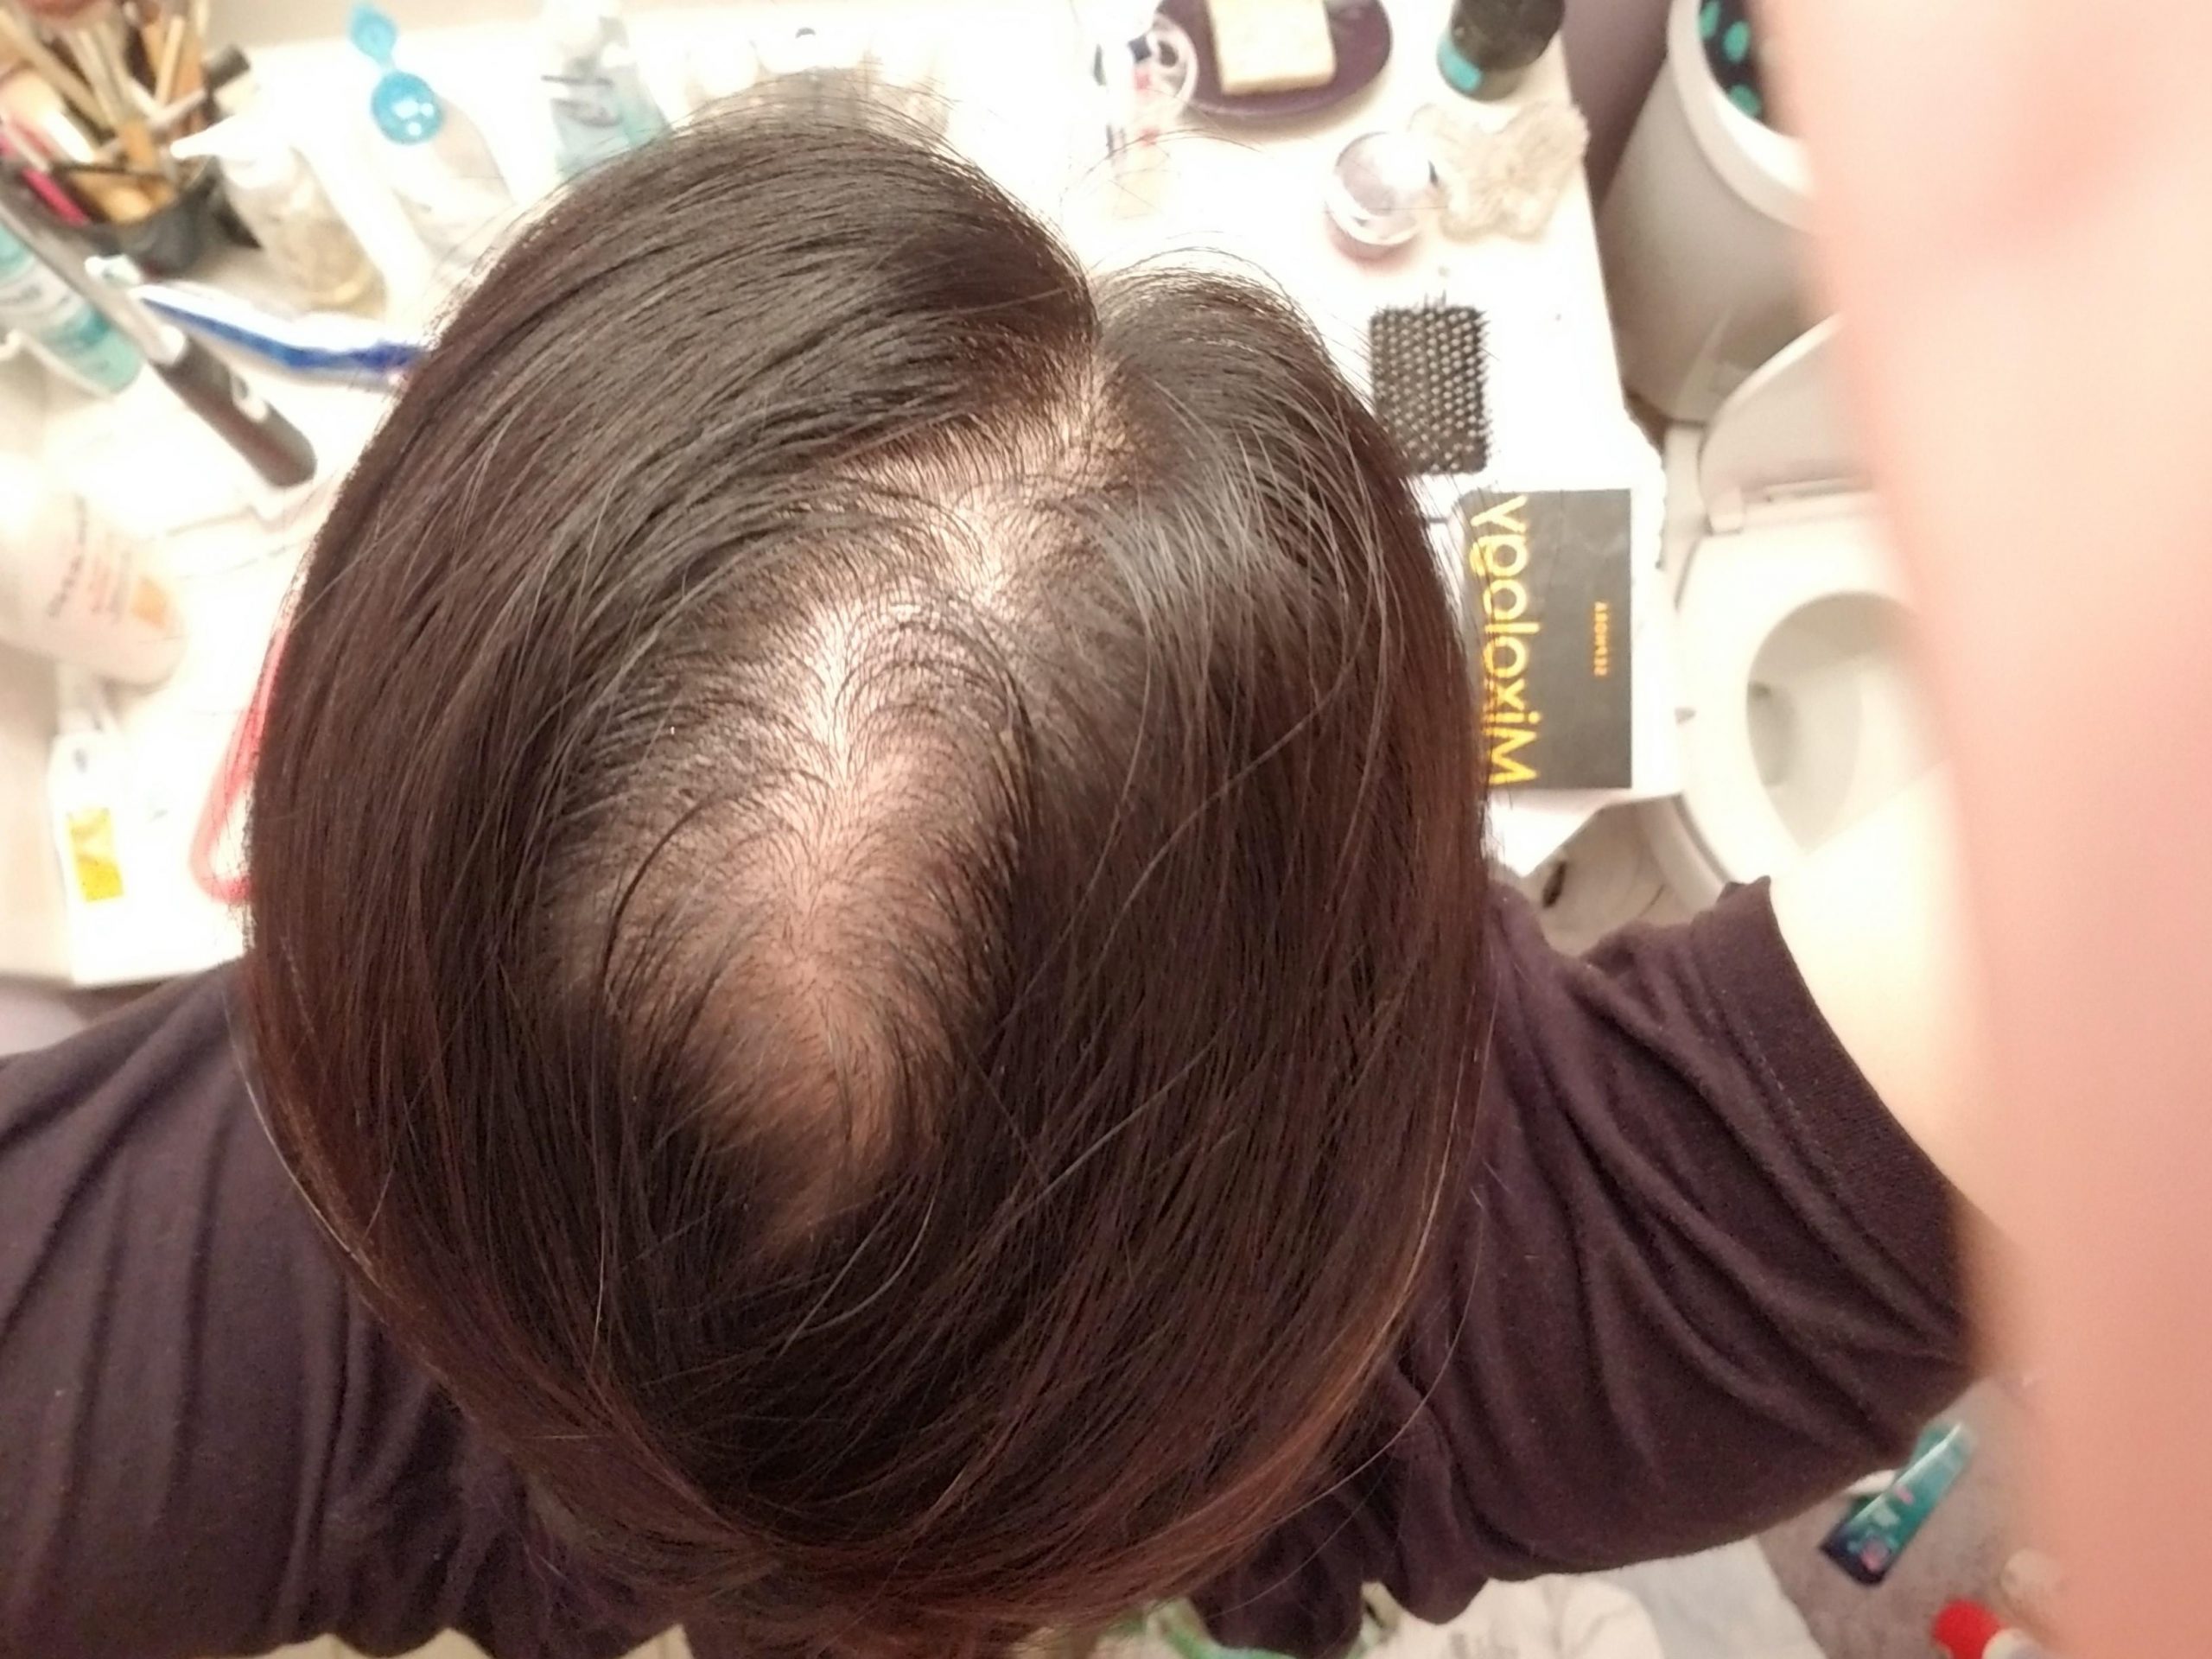 PCOS related hair loss. I